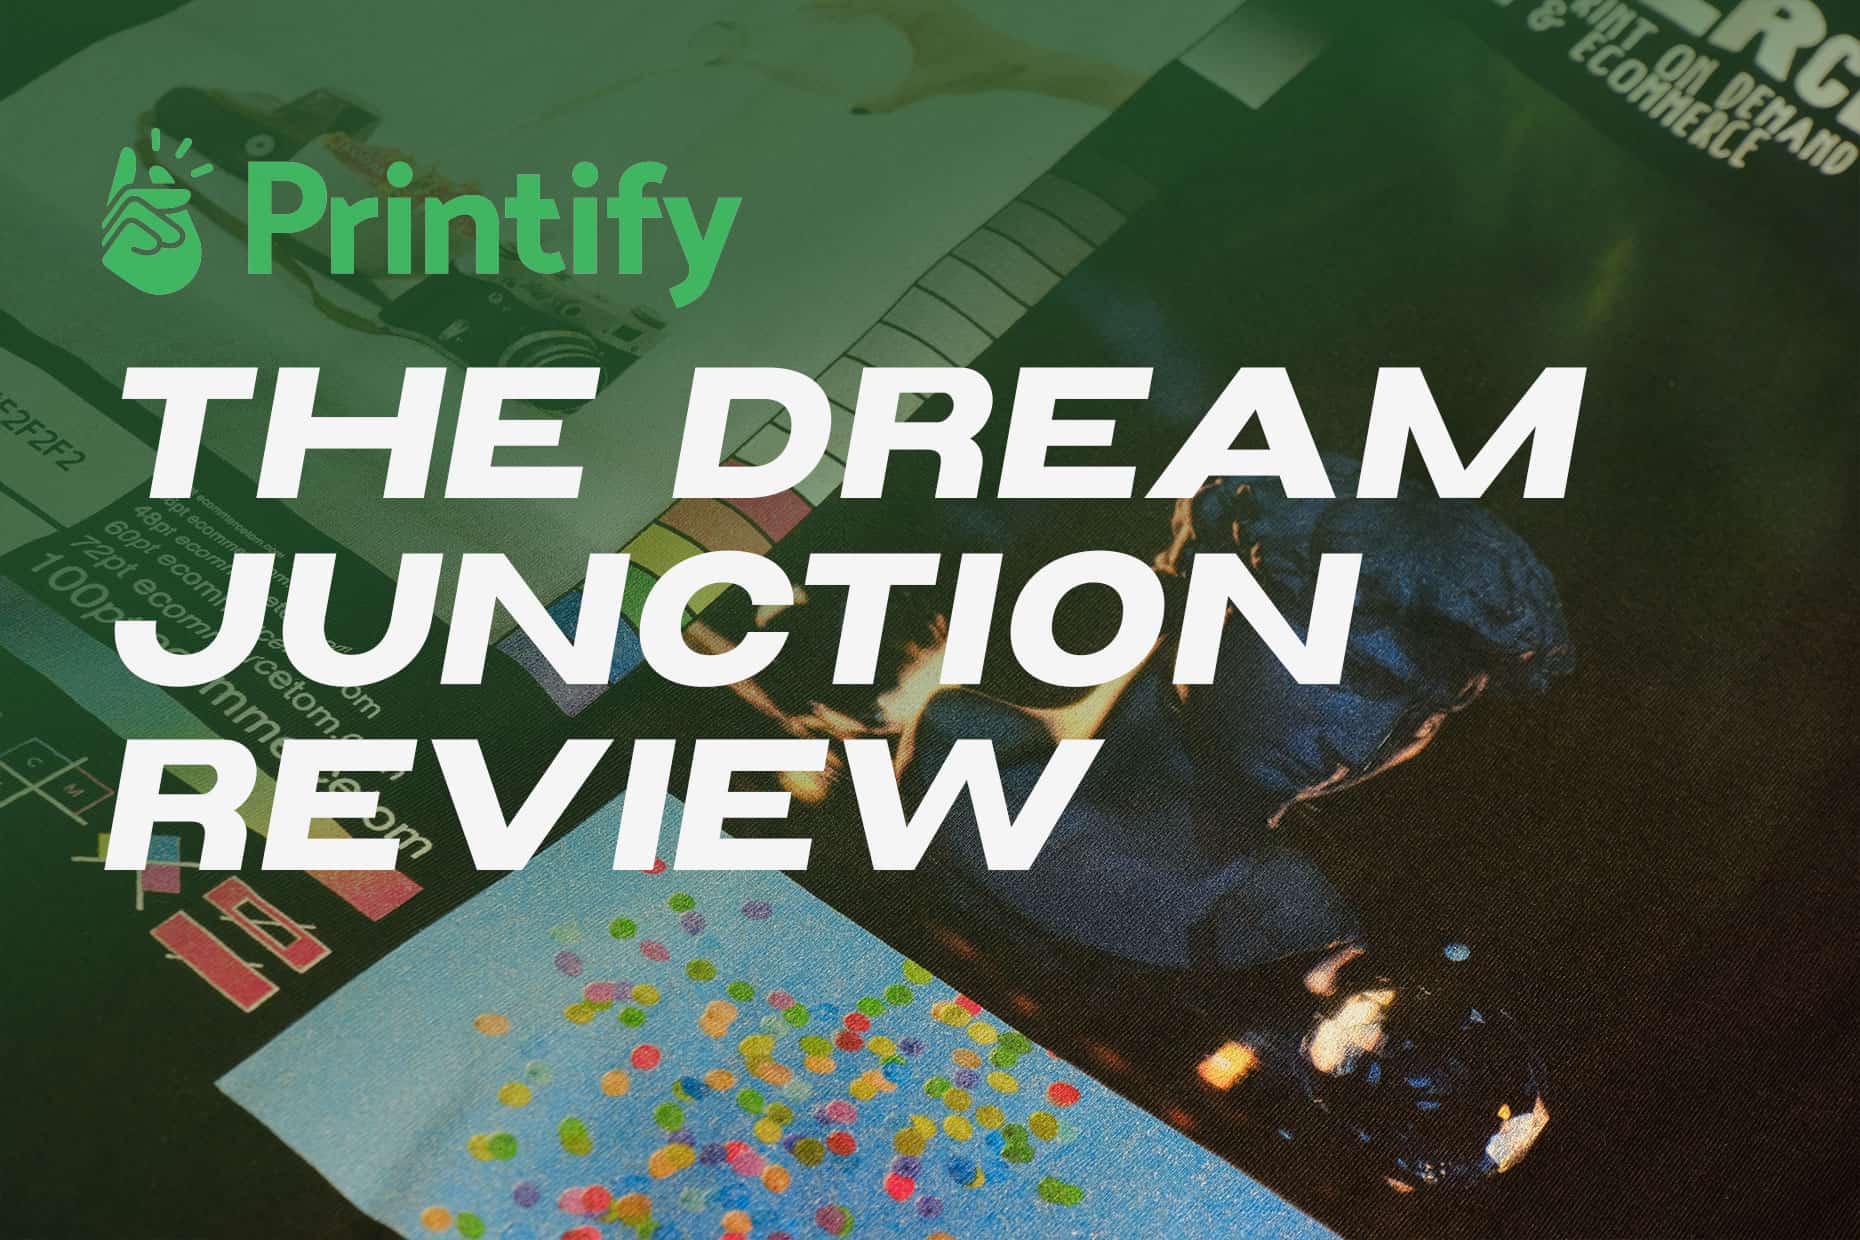 The Dream Junction Review